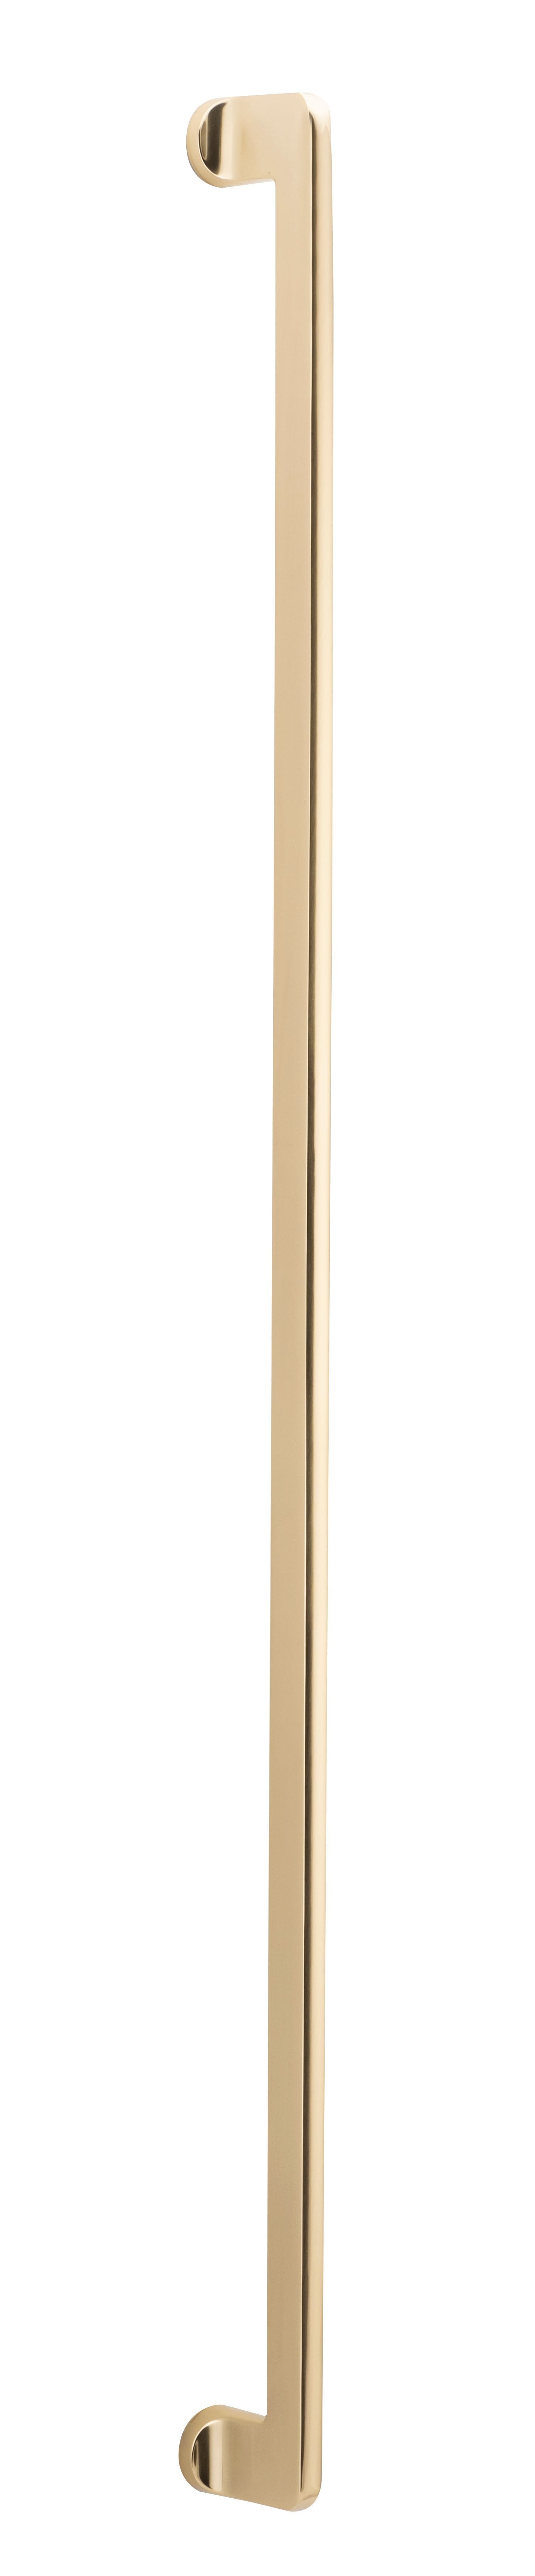 Baltimore Pull Handle Polished Brass 900mm